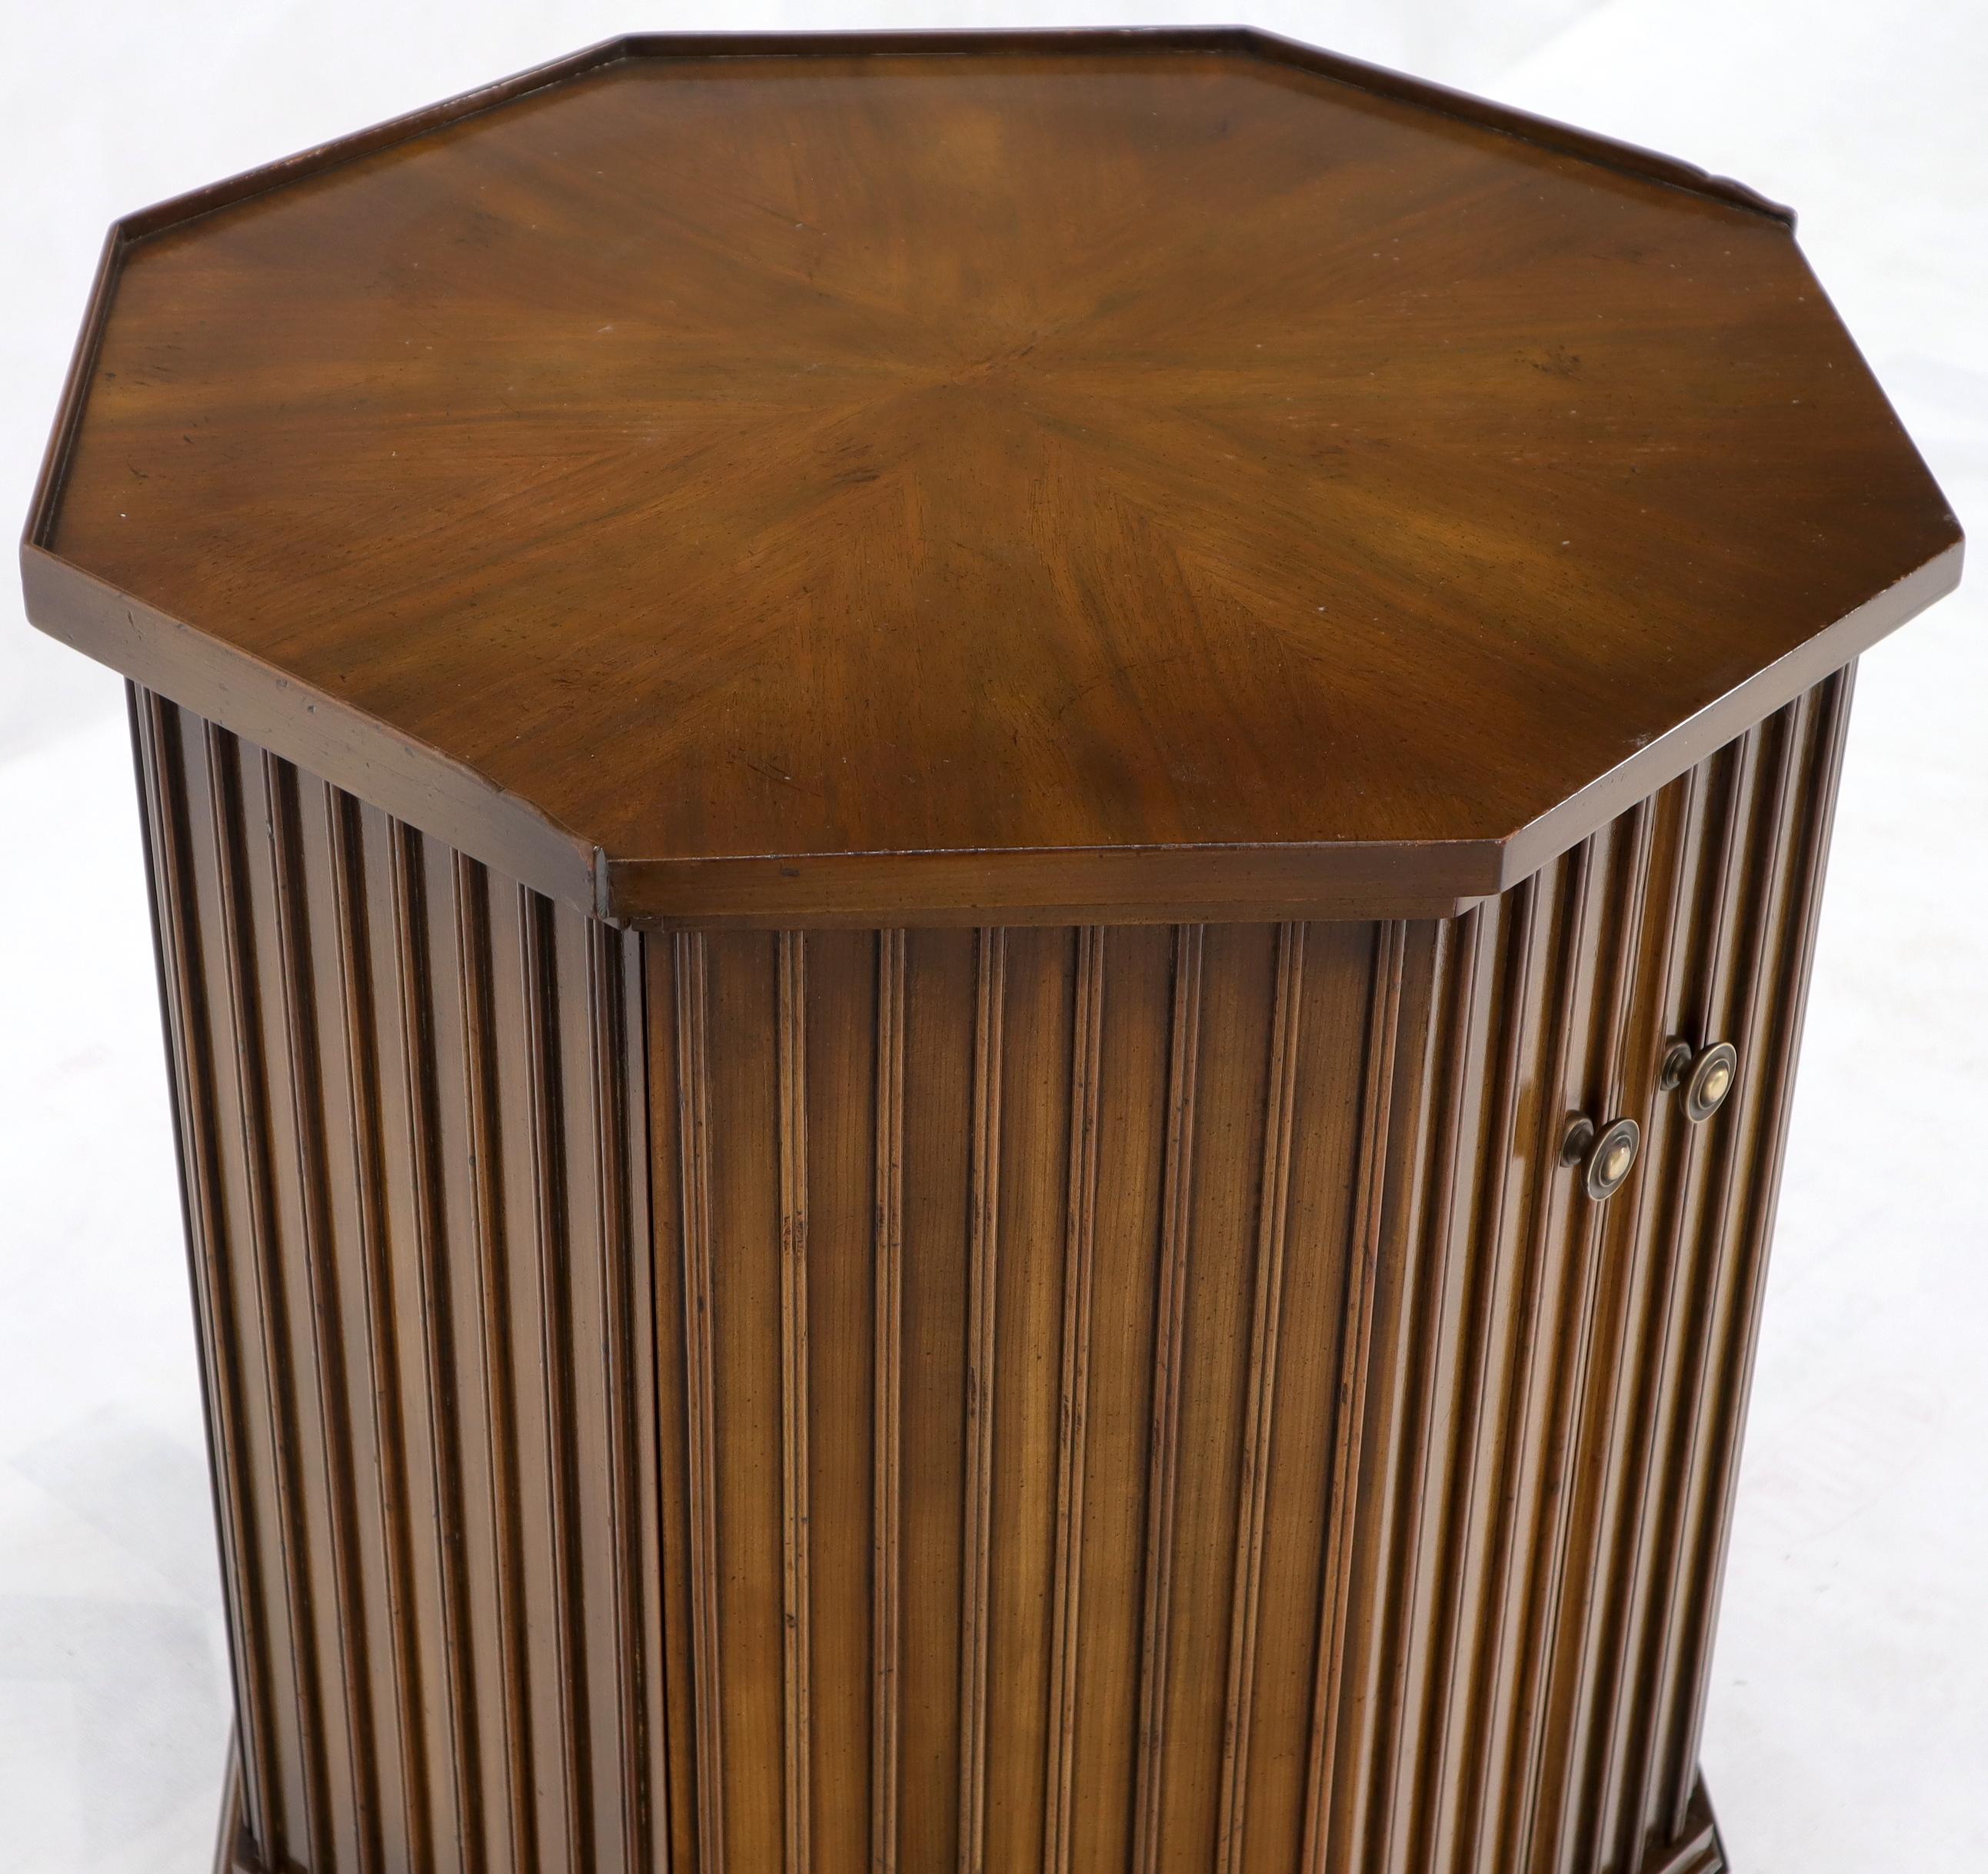 Two Doors Compartment Cabinet Octagon Shape Side Occasional End Table Pedestal In Excellent Condition For Sale In Rockaway, NJ